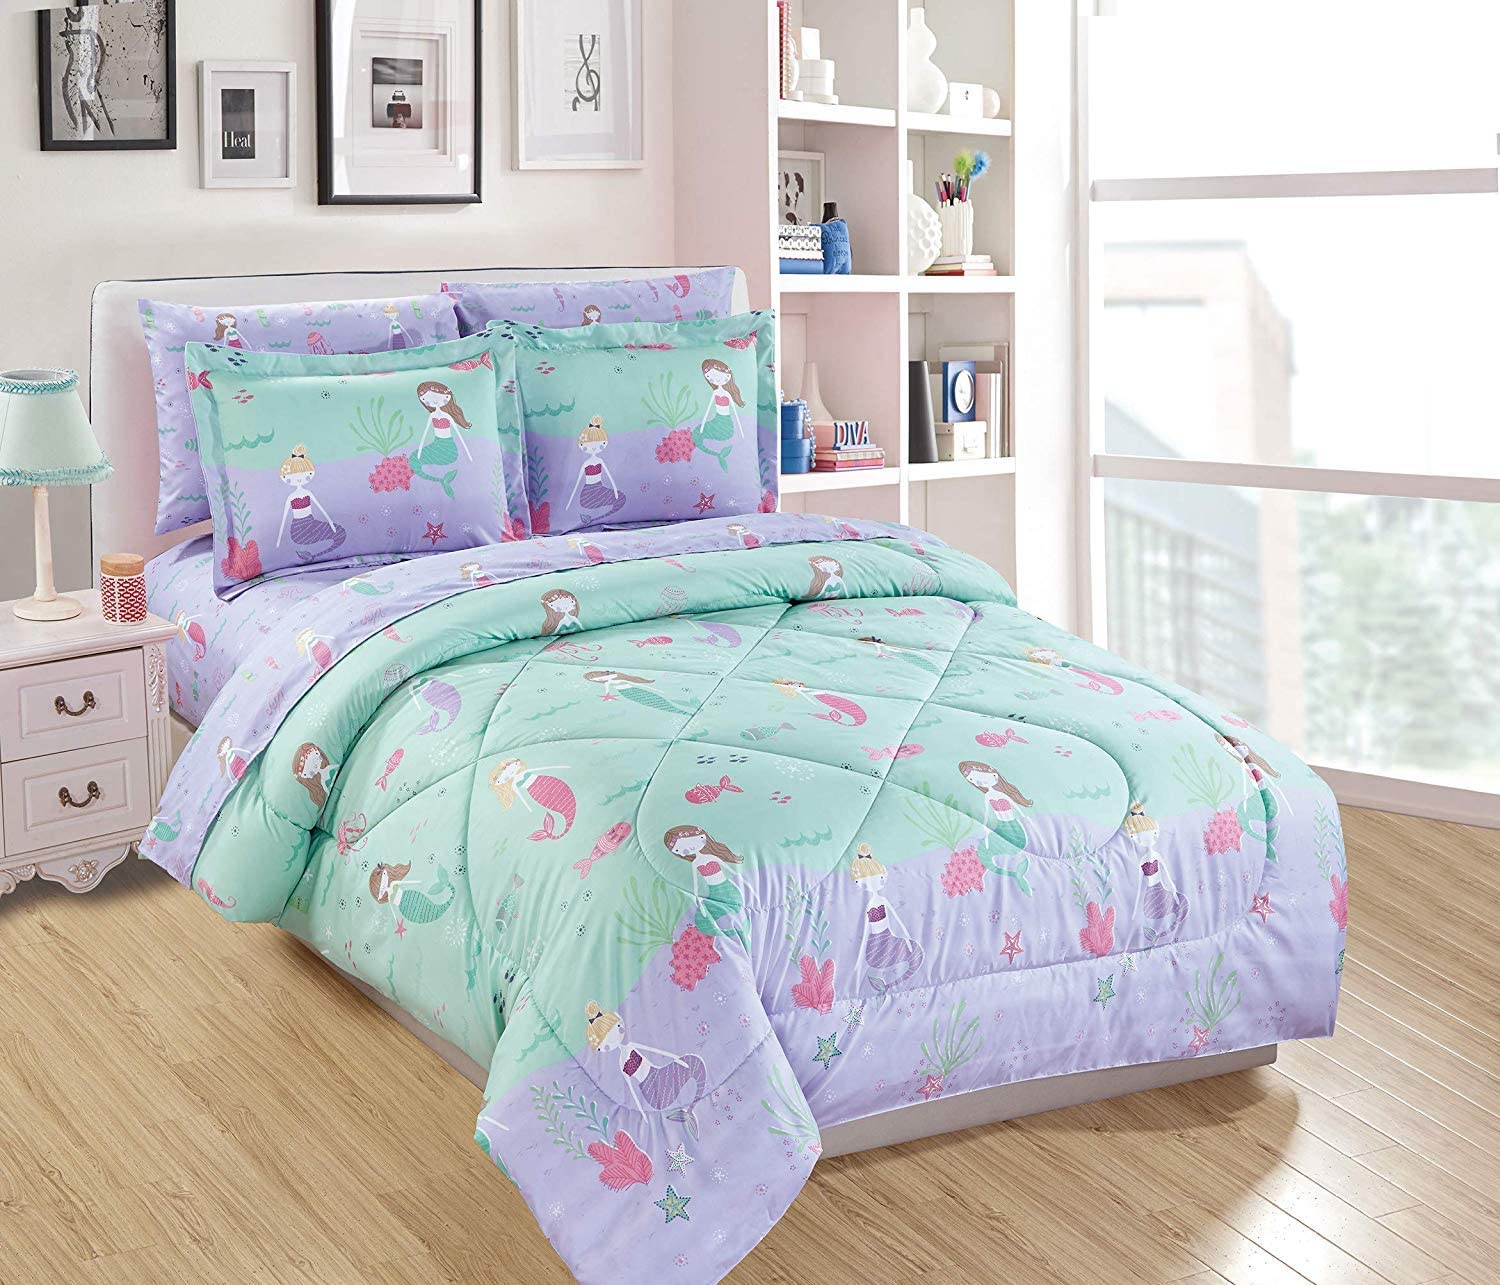 5PC BEDROOM KIDS BED IN A BAG COMFORTER SHEET COMPLETE BEDDING SET TWIN SIZE 